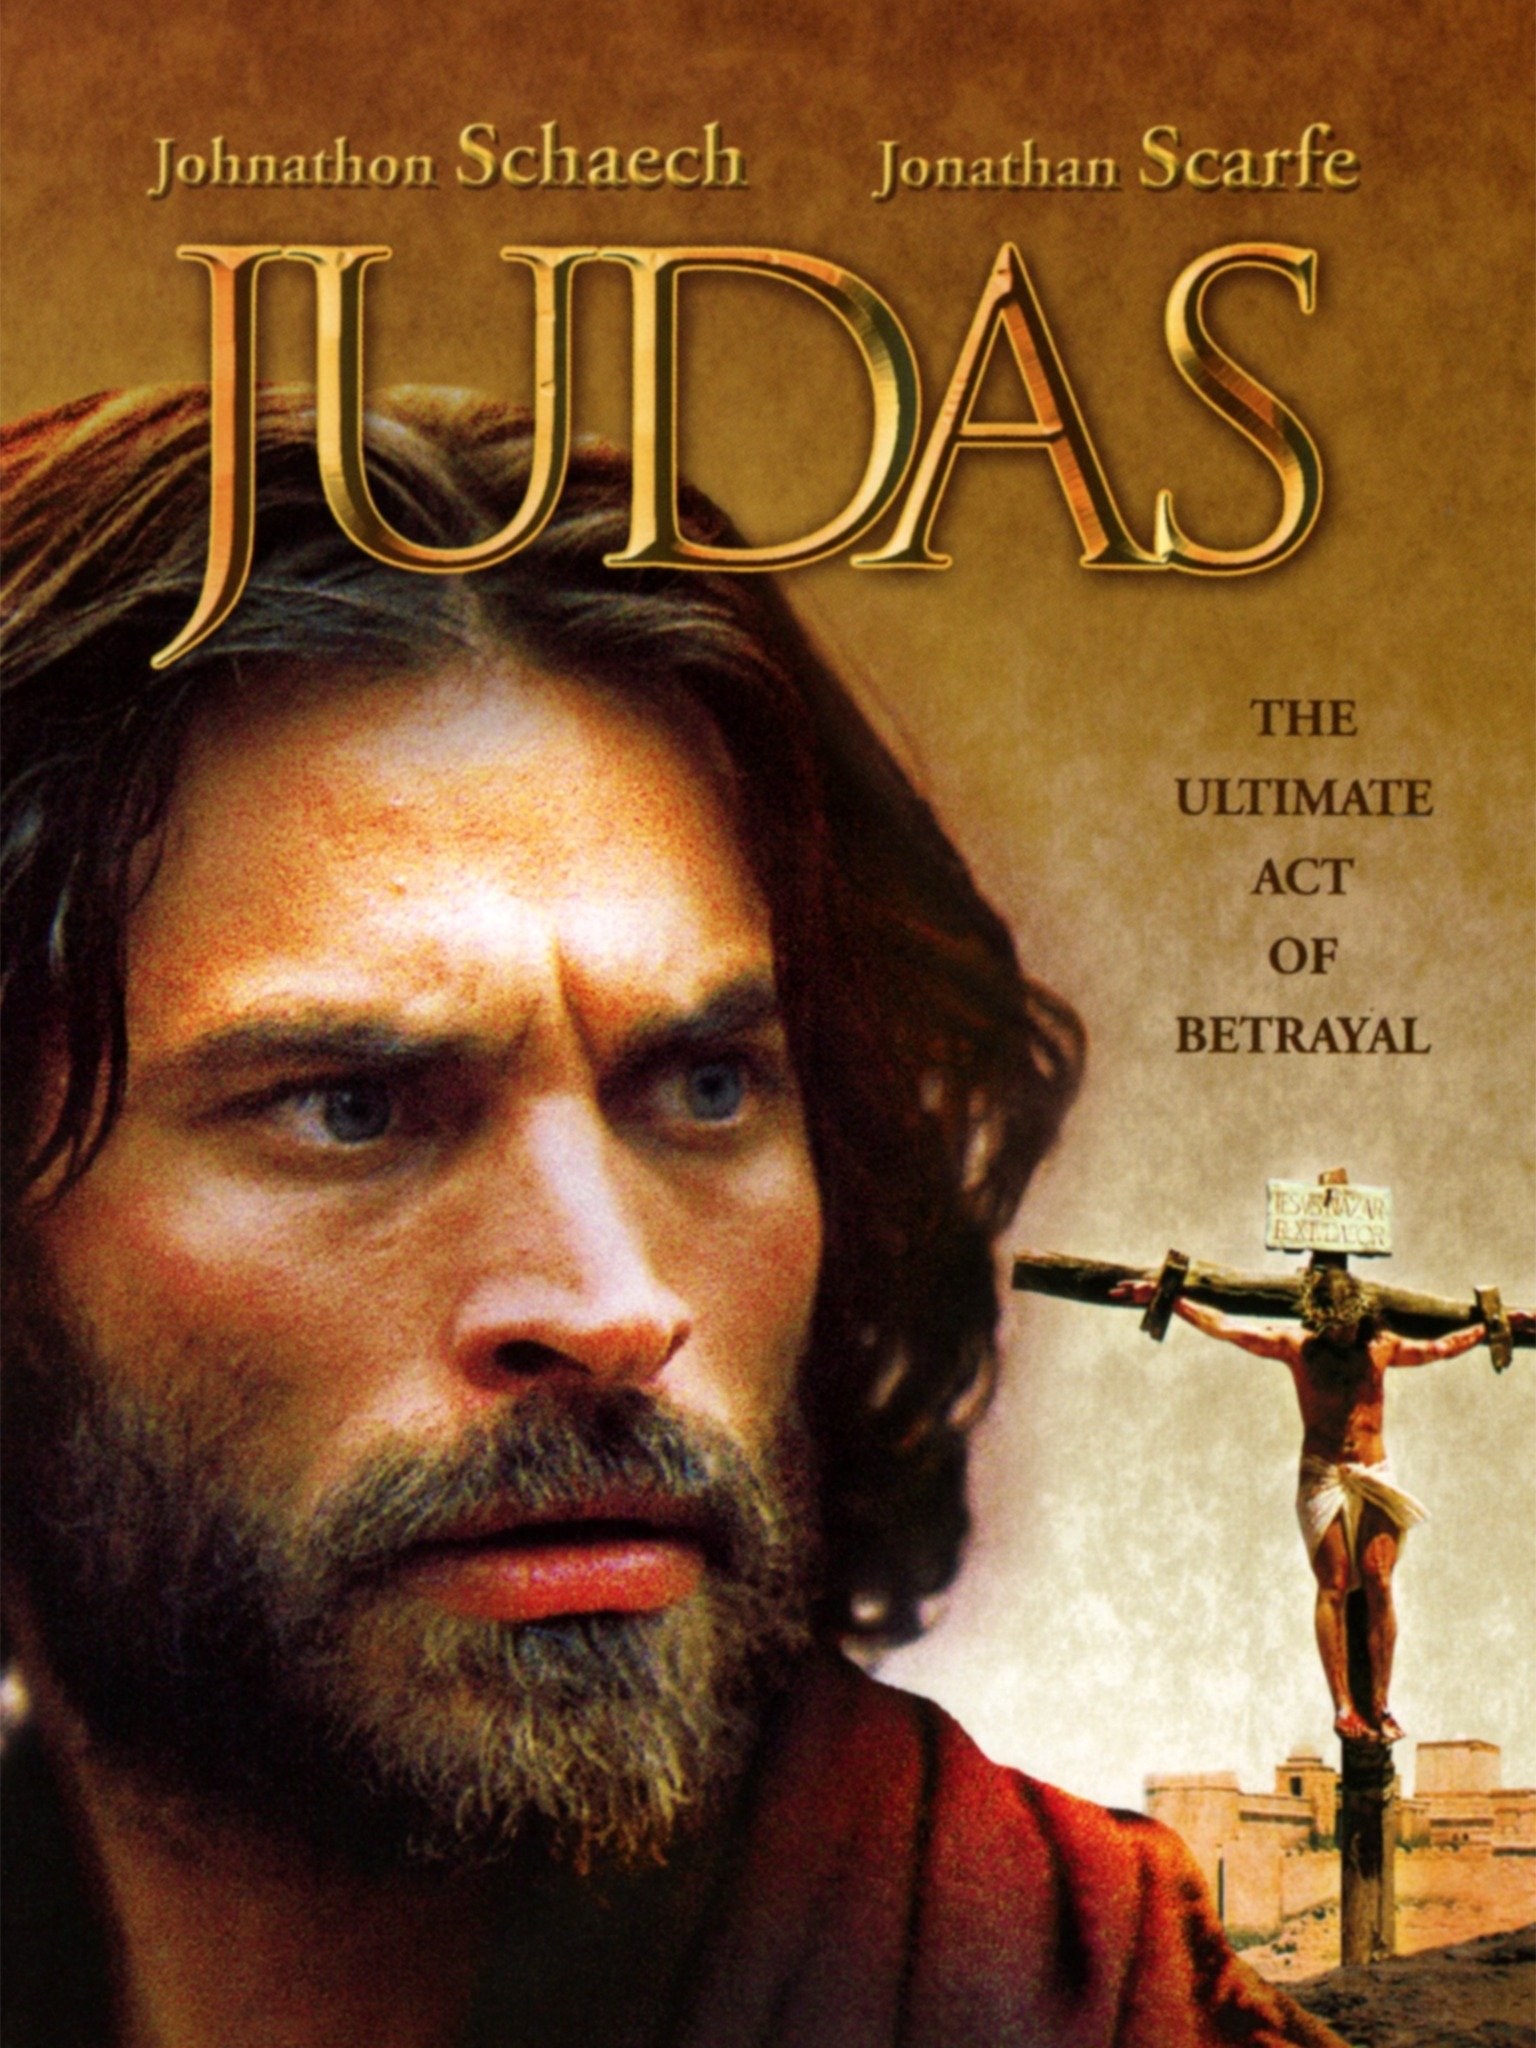 are there any recordings of josh young playing judas